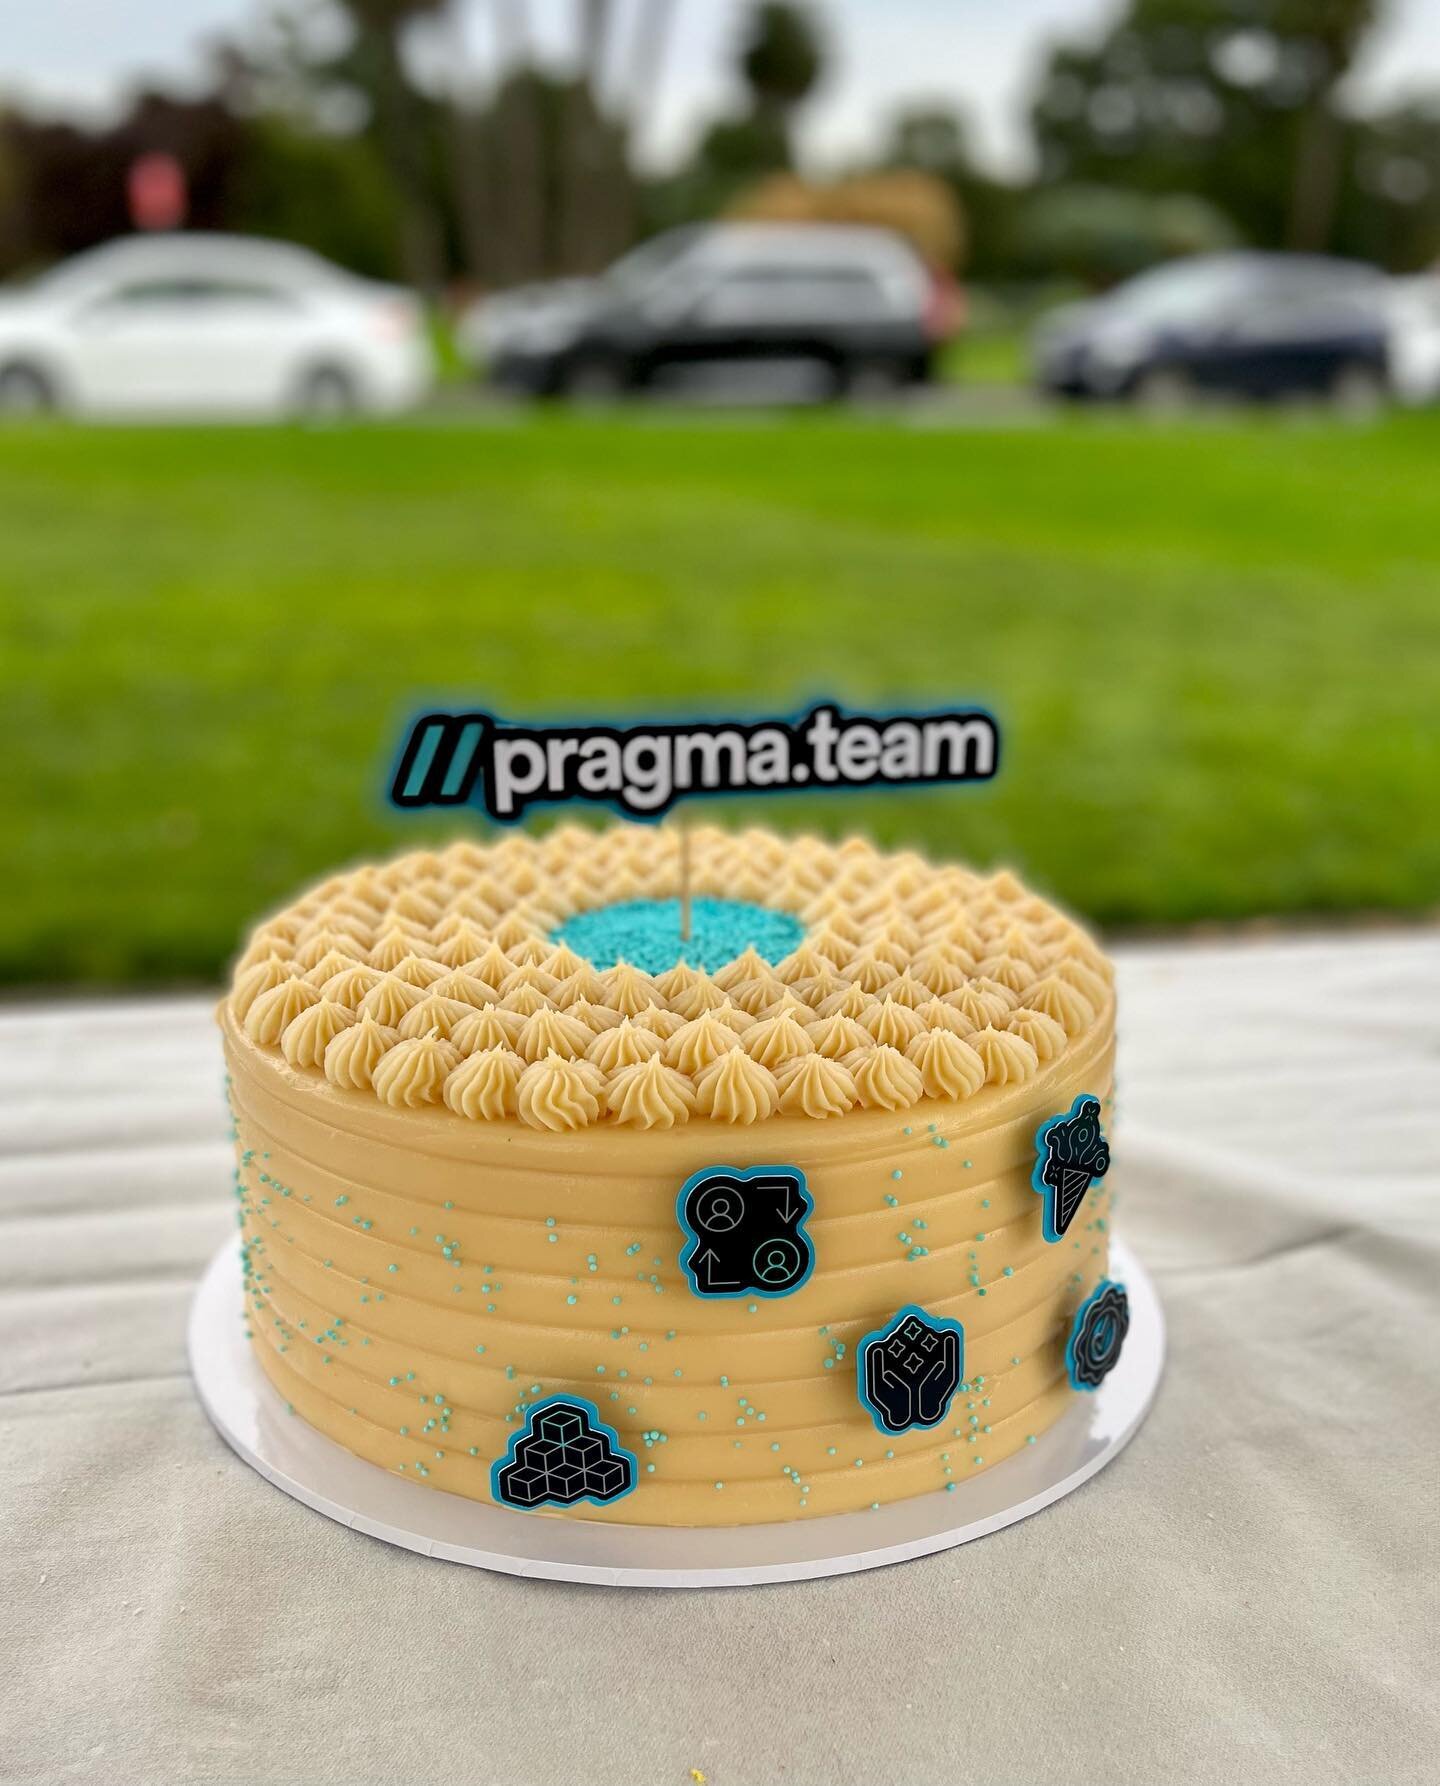 On a belated family event, Pragmateam has turned 7!

Lots of twists and turns from where we started and in a really happy place now.

With a team like this, bring on another 7!